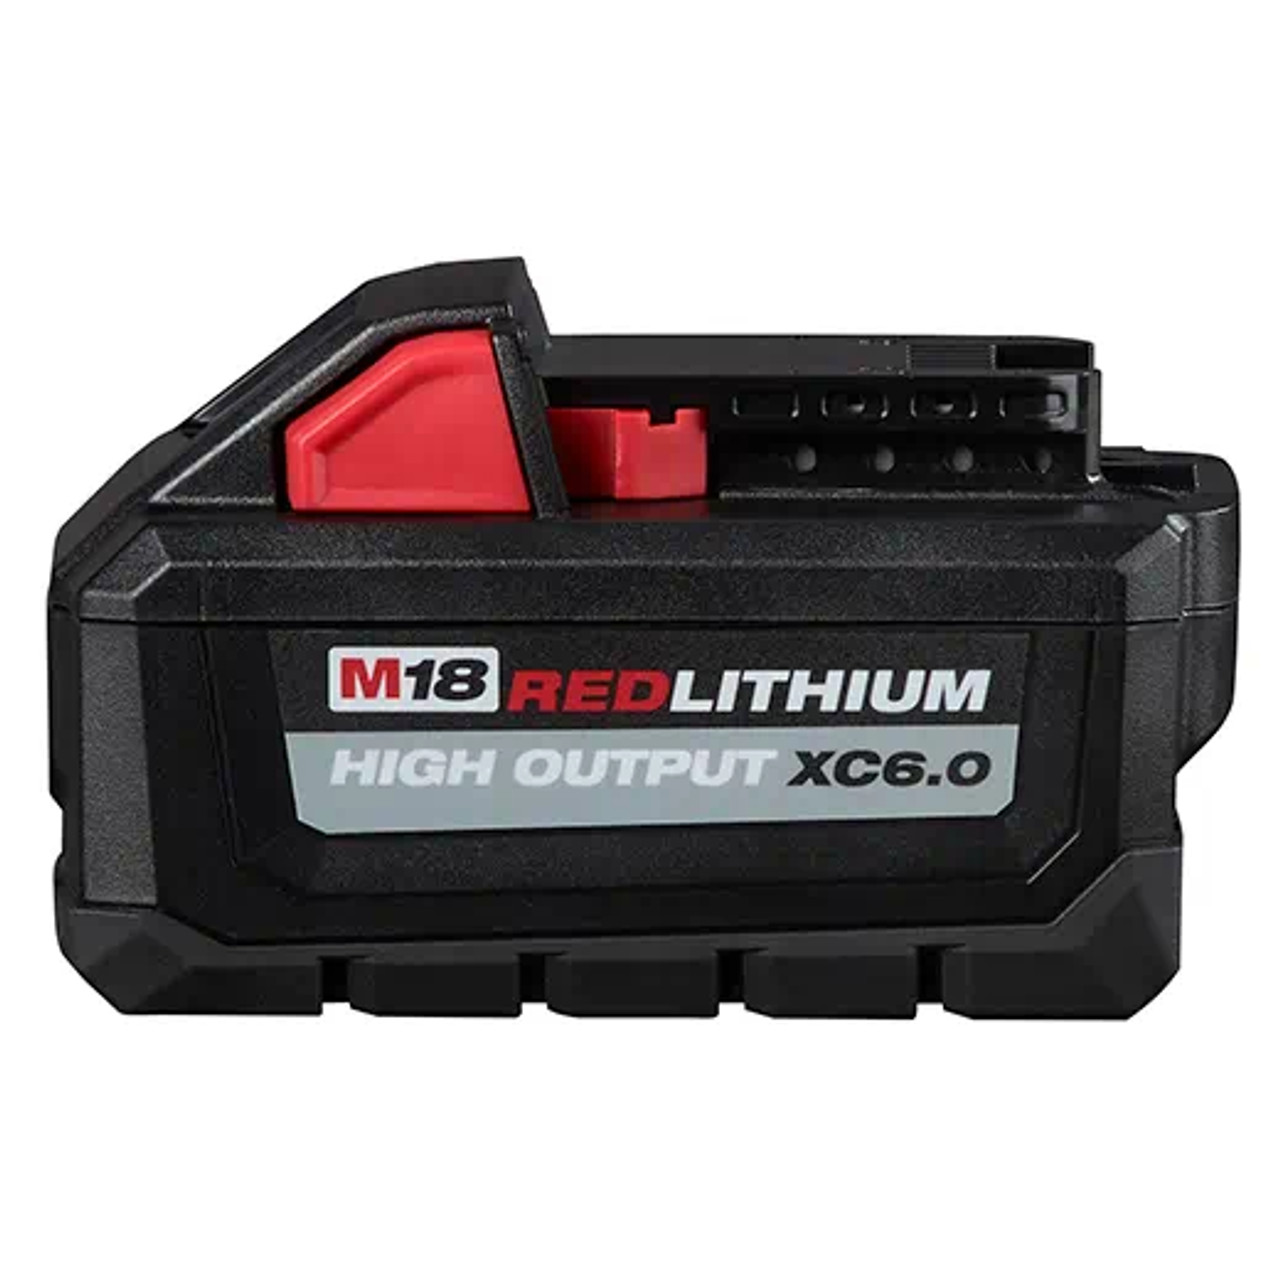 M18 REDLITHIUM HIGH OUTPUT XC6.0 Battery Pack (2 Pk)